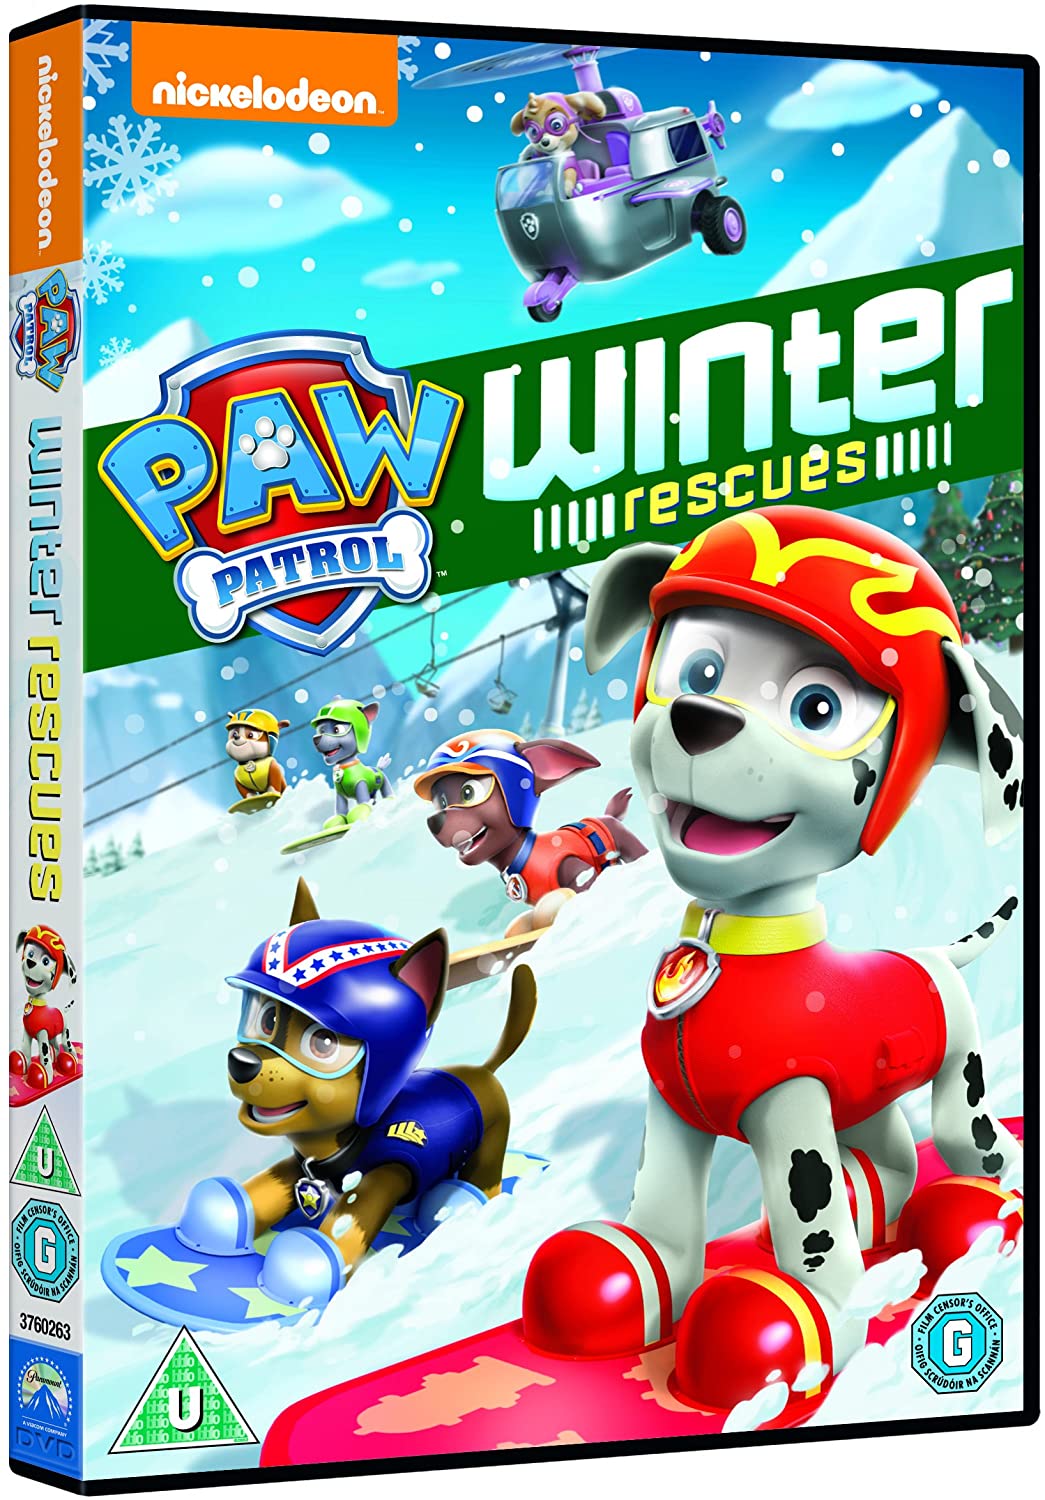 Paw Patrol: Winter Rescues [2014] - Animation [DVD]